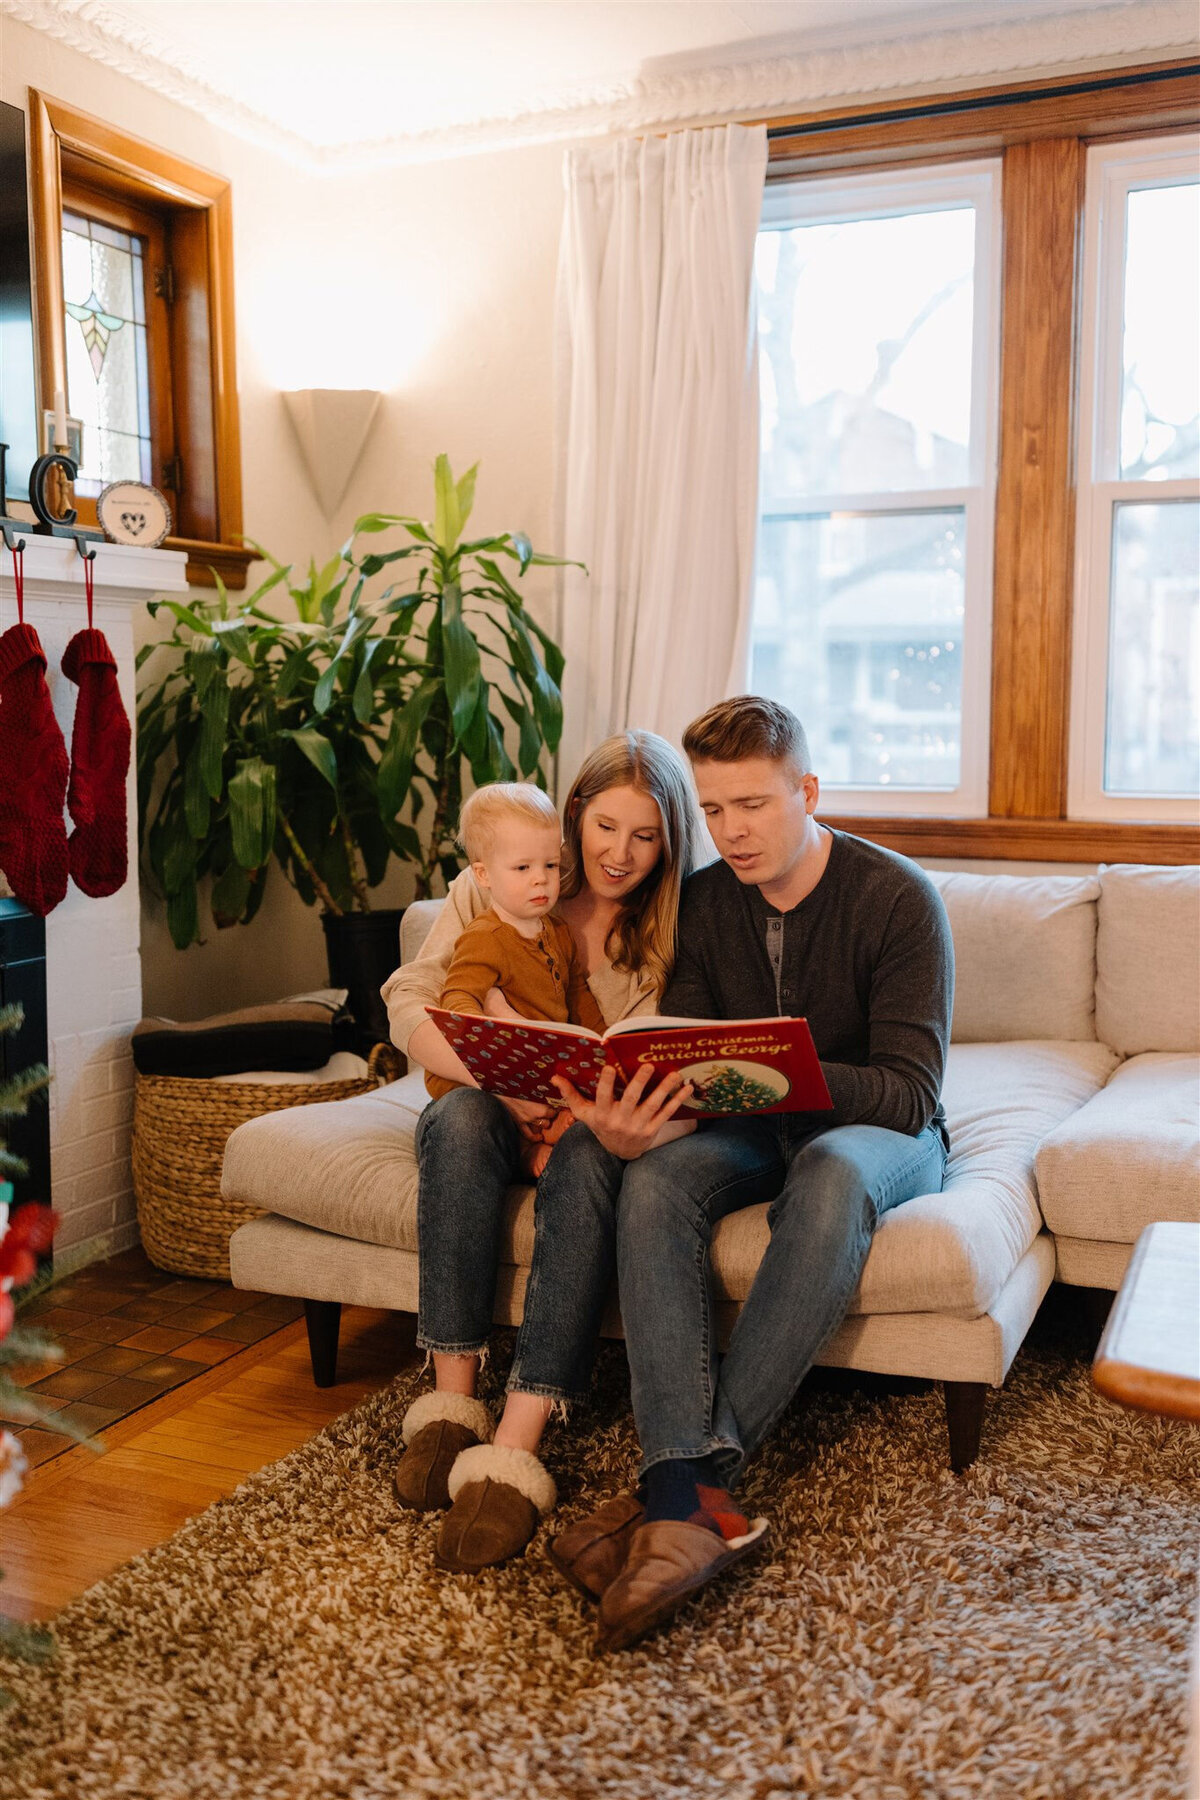 st-louis-family-photographer-in-home-session-winter-family-session-landis-family-174